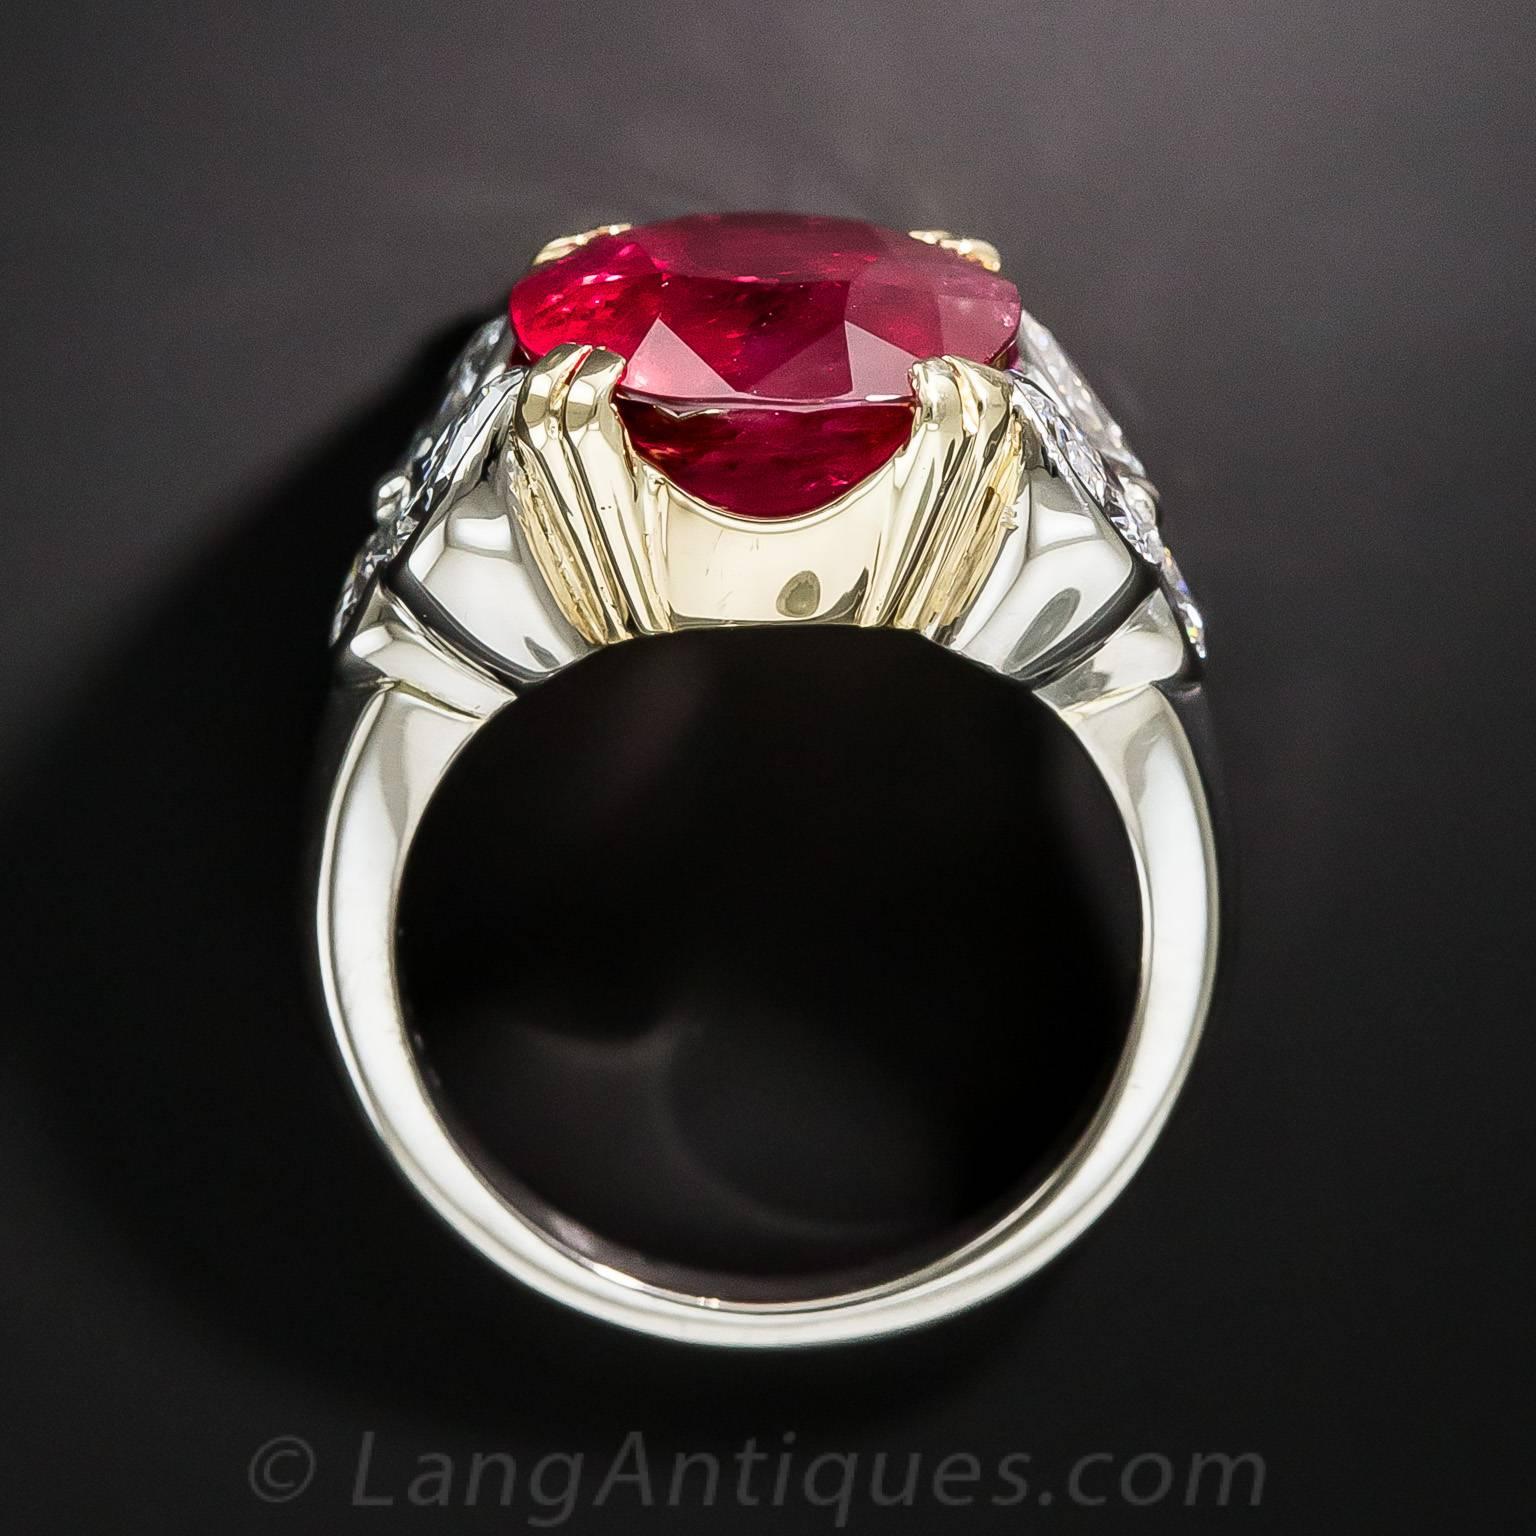 9.15 Carat GIA Certified Ruby Diamond Ring For Sale 2